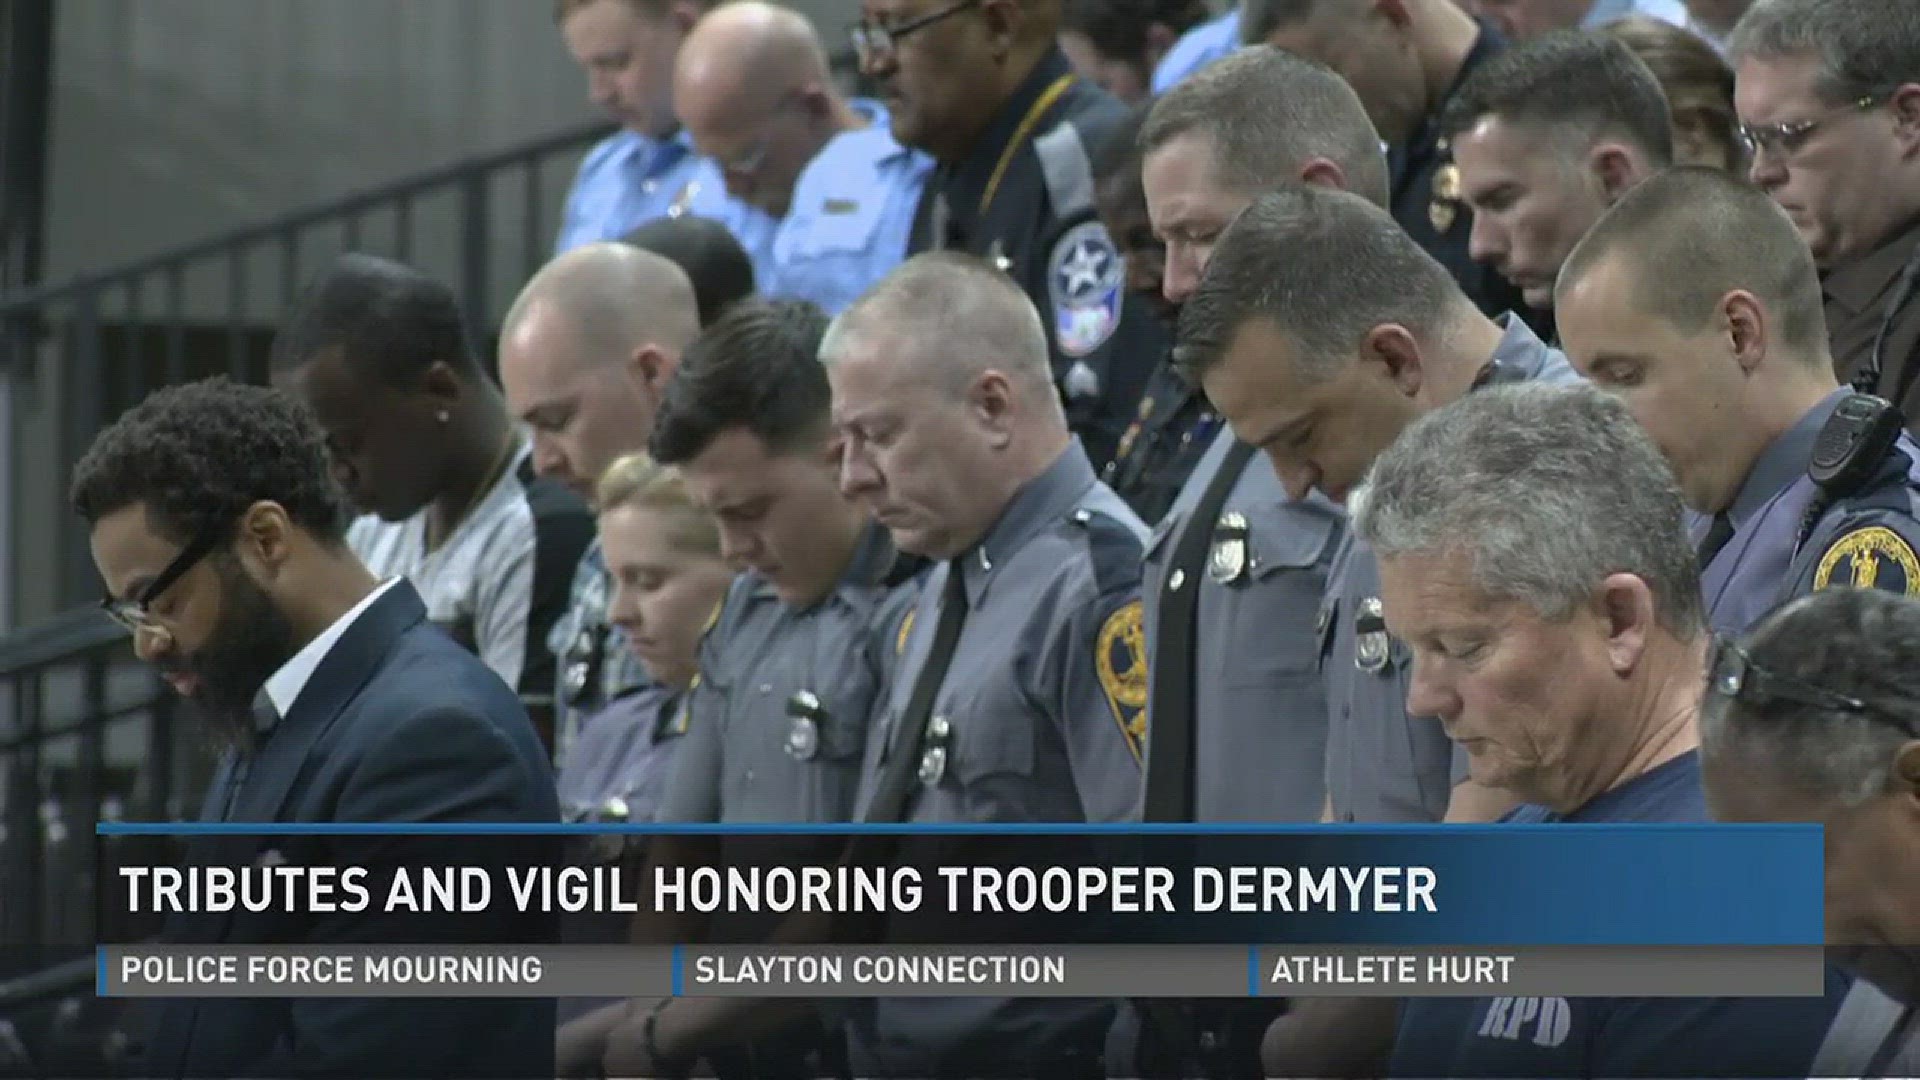 13News Now Arrianee LeBeau has more on how law enforcement honored Trooper Chad Dermyer.